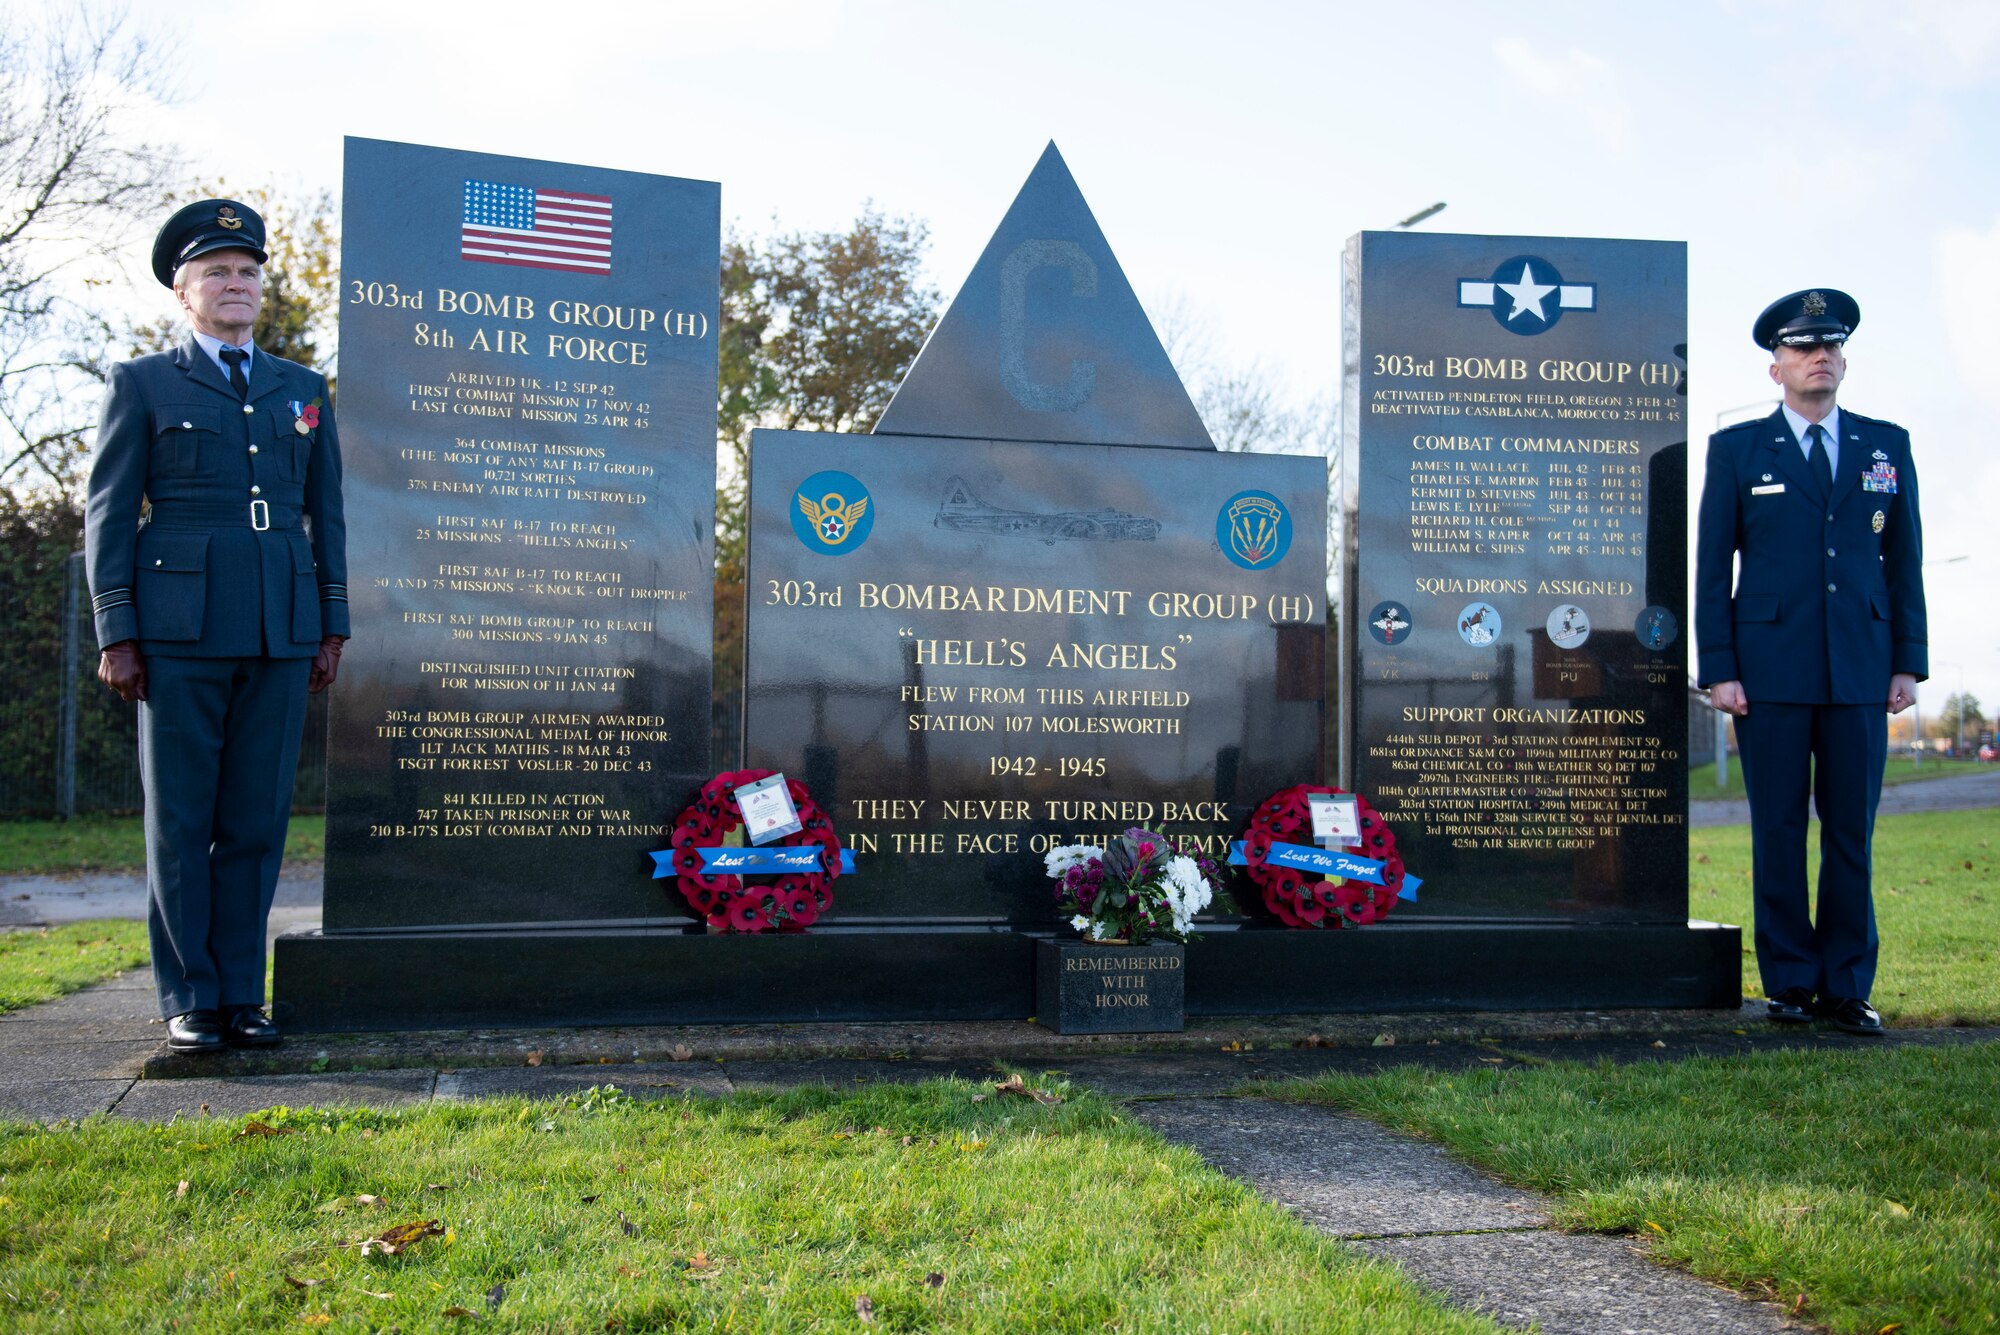 Royal Air Force Sqn. Ldr. Clive Wood, left, RAF Alconbury and RAF Molesworth RAF commander, and U.S. Air Force Col. Richard Martin, right, 423rd Air Base Group commander, stand near the World War II memorial during a Remembrance Sunday ceremony at the 303rd Bombardment Group memorial monument at RAF Molesworth, England, Nov. 3, 2020. Remembrance Sunday is commemorated the second Sunday every November to honor the service and sacrifice of Armed Forces, British and Commonwealth veterans, as well as the Allies that fought alongside them in the two World Wars and later conflicts. (U.S. Air Force photo by Senior Airman Jennifer Zima)